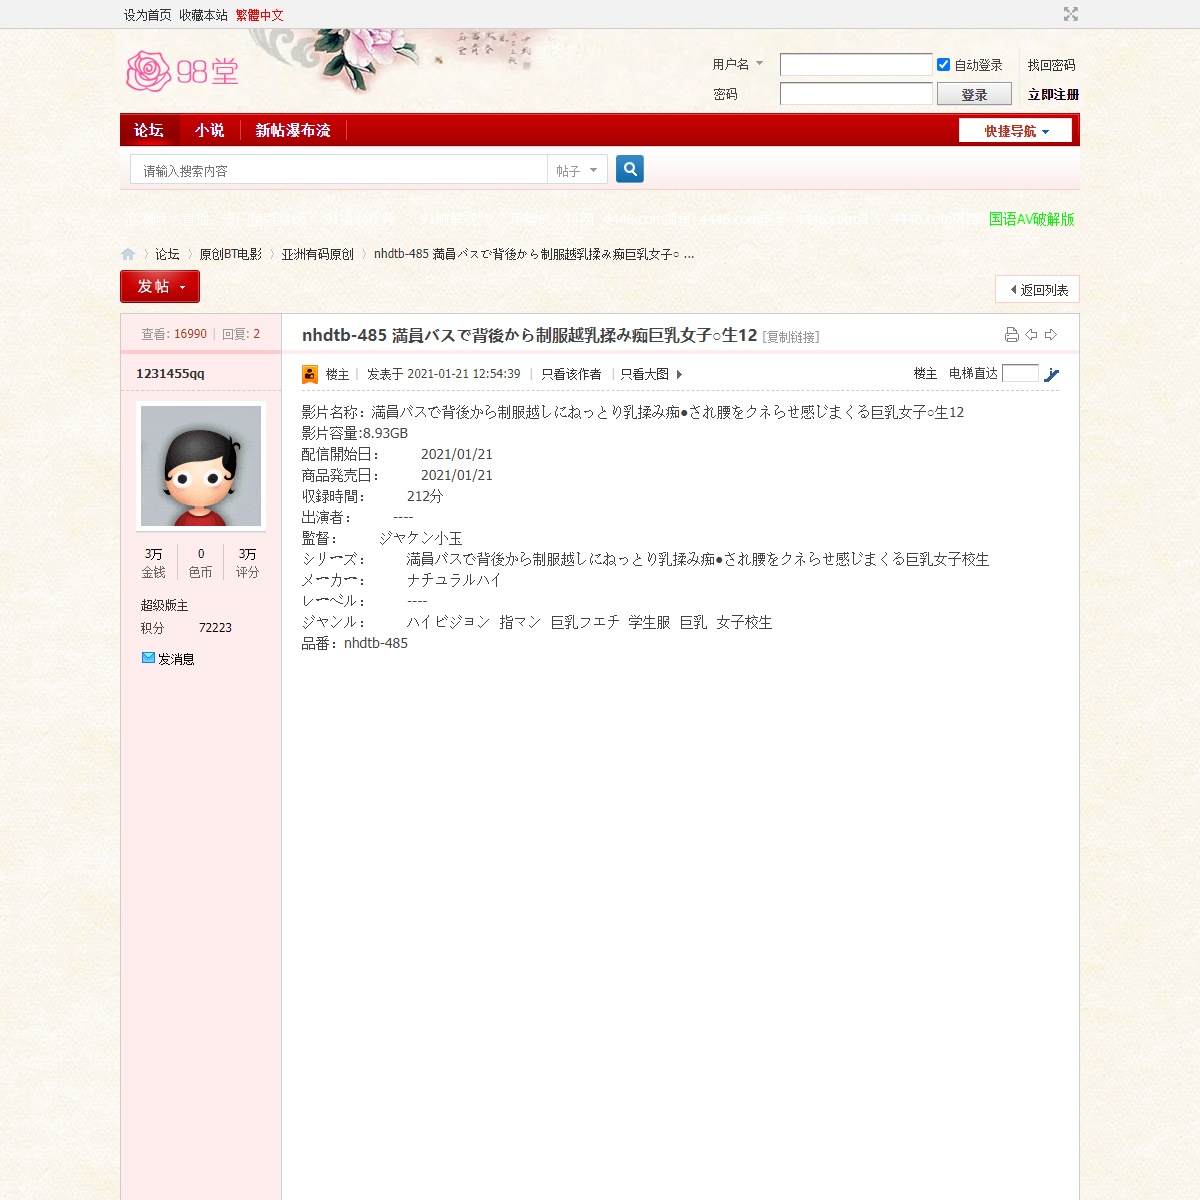 A complete backup of https://www.sehuatang.net/thread-447068-1-1.html